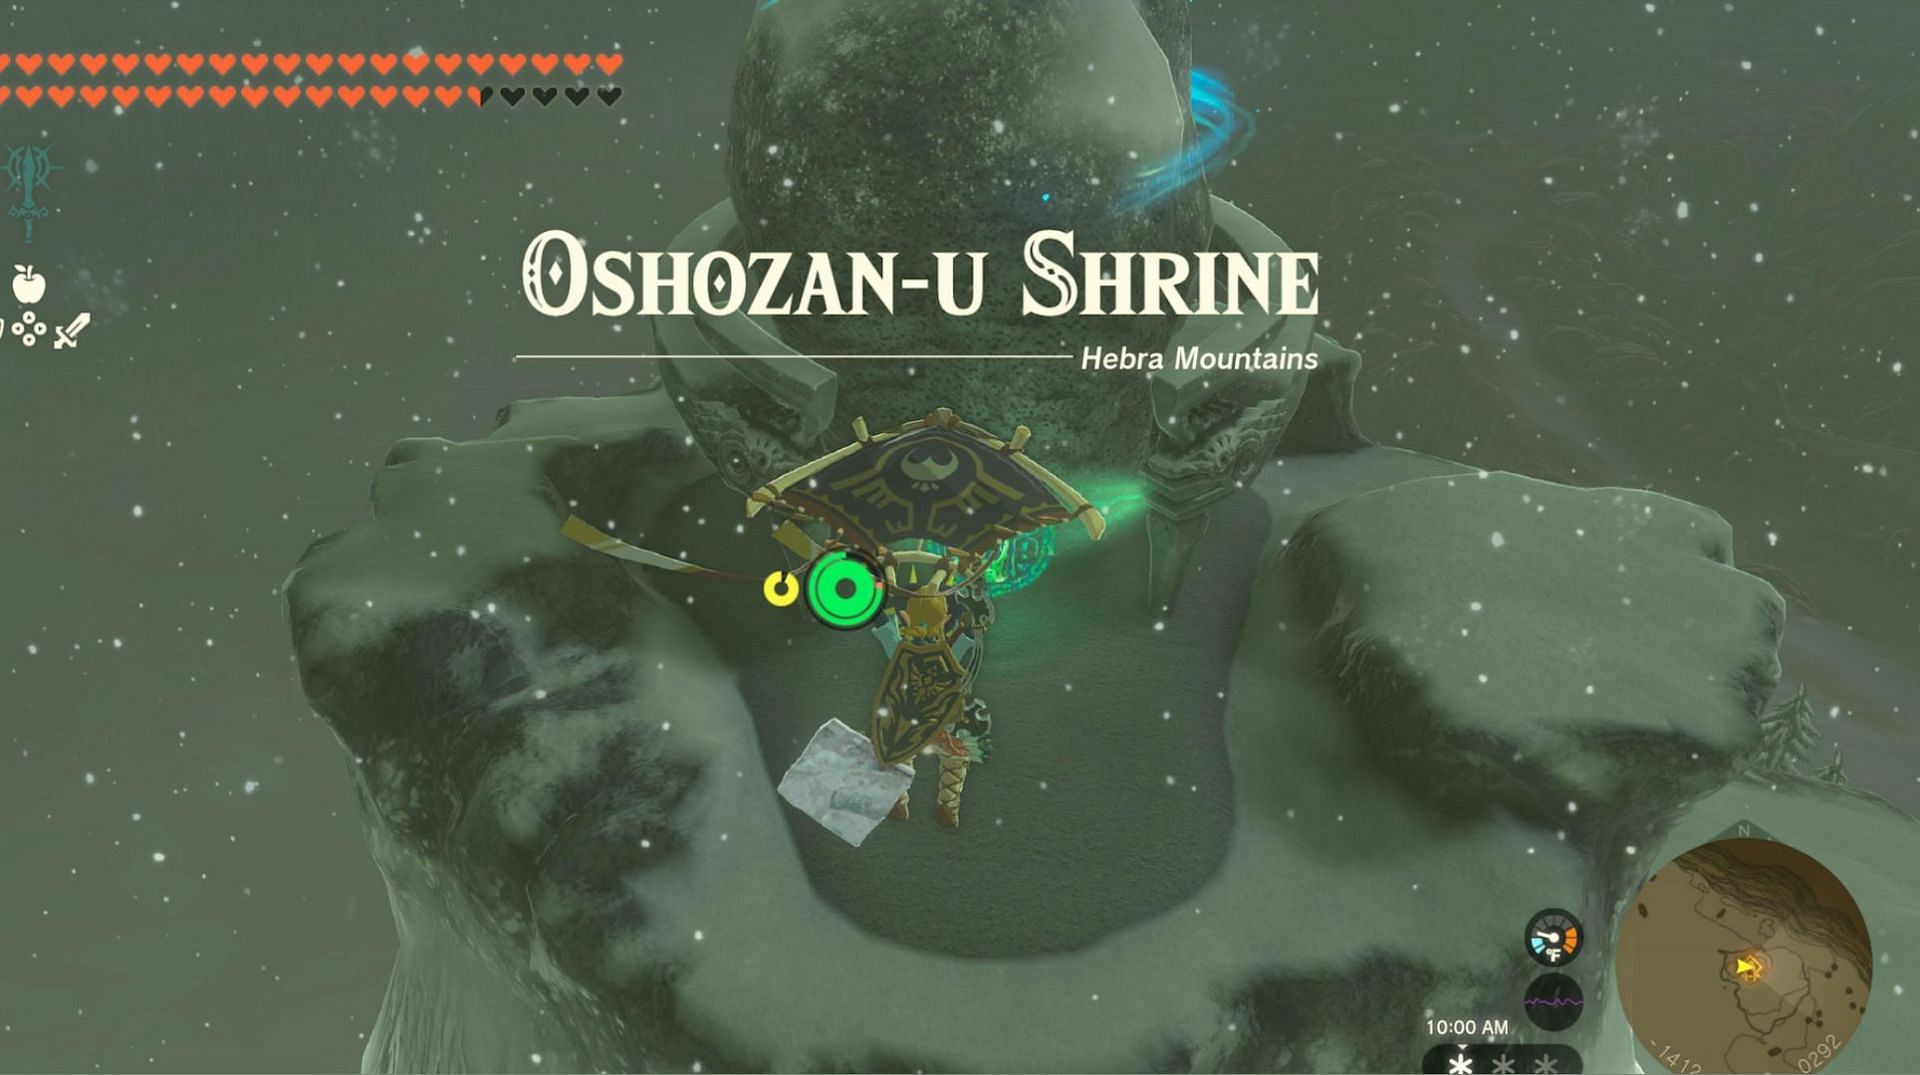 You must hit the circular target to complete the Oshozan-u Shrine in The Legend of Zelda Tears of the Kingdom (Image via Nintendo)